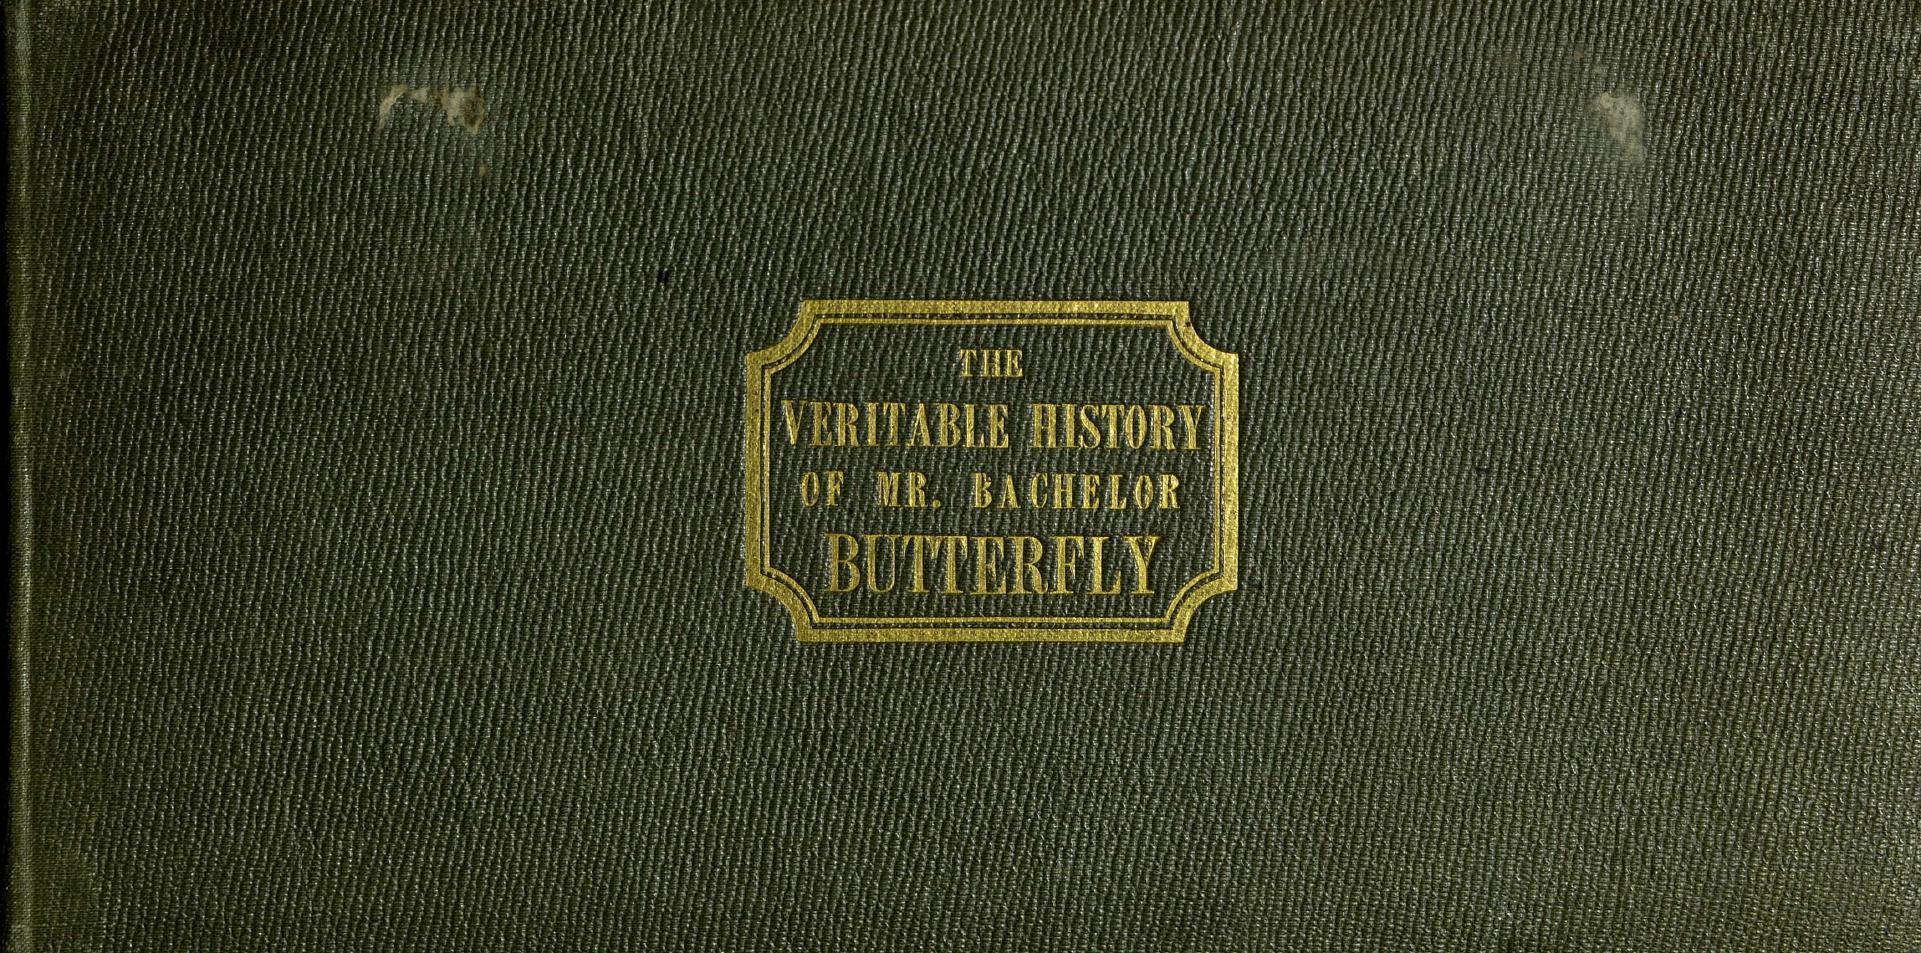 The veritable history of Mr. Bachelor Butterfly : showing how it was diversified by many changes, for after being married in the belly of a whale he n(...)